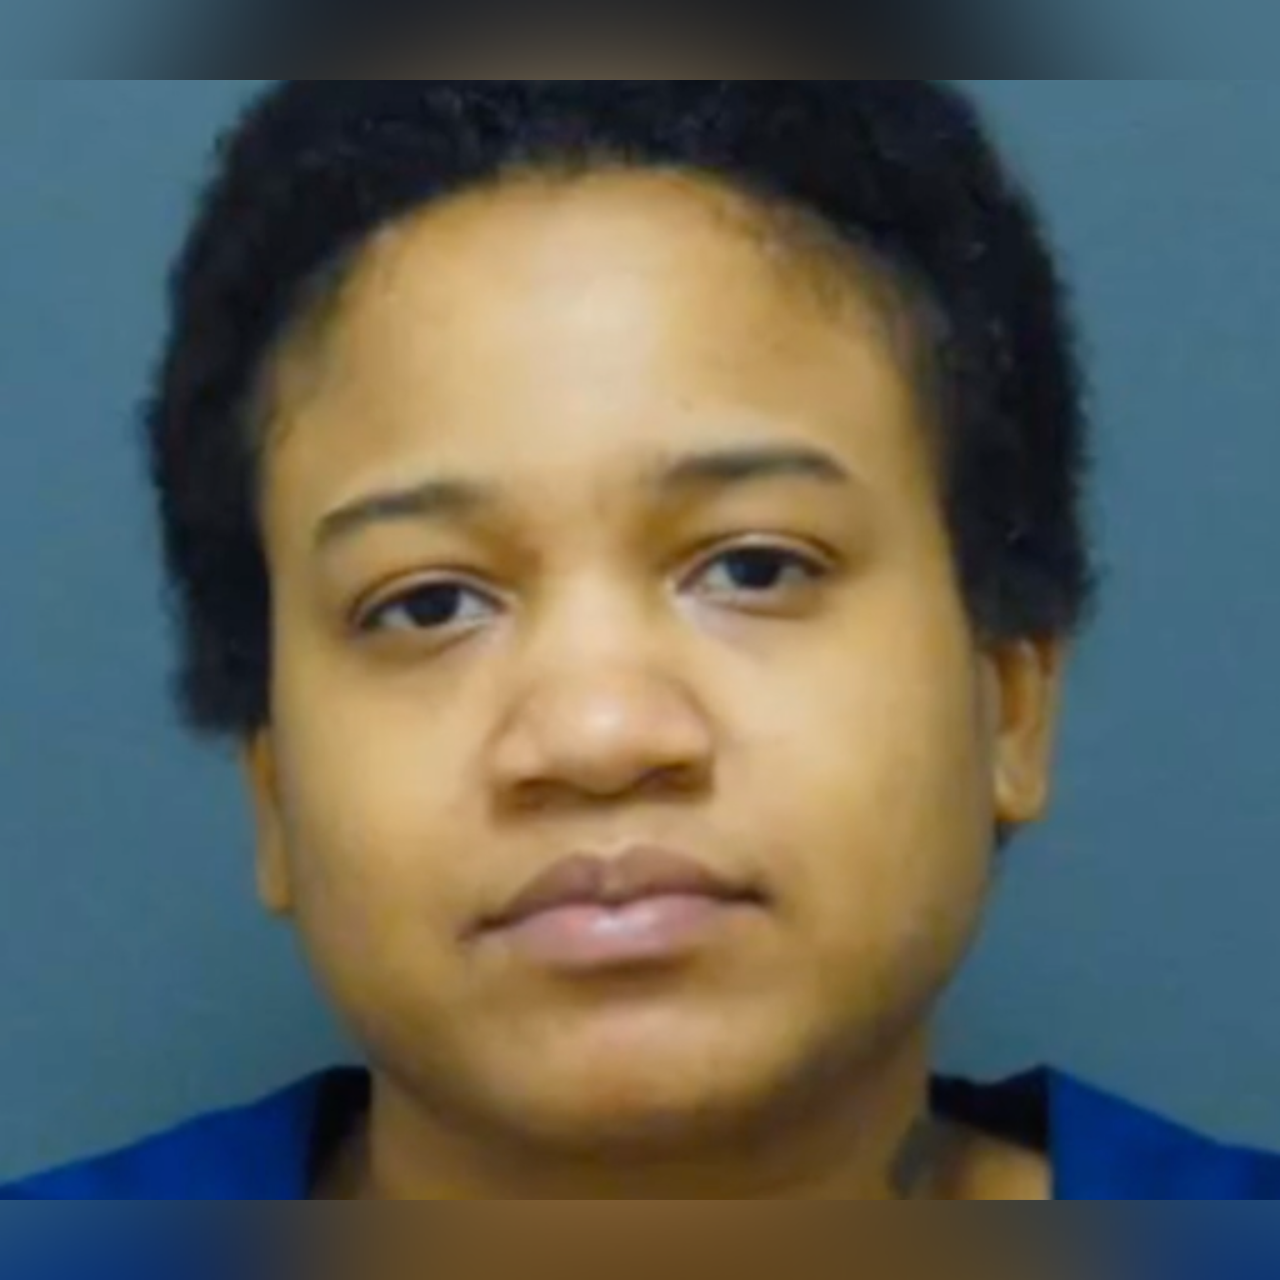 Michigan Mother Killed Her 2 Children, Stored Their Bodies In Freezer Shows Investigation Discovery